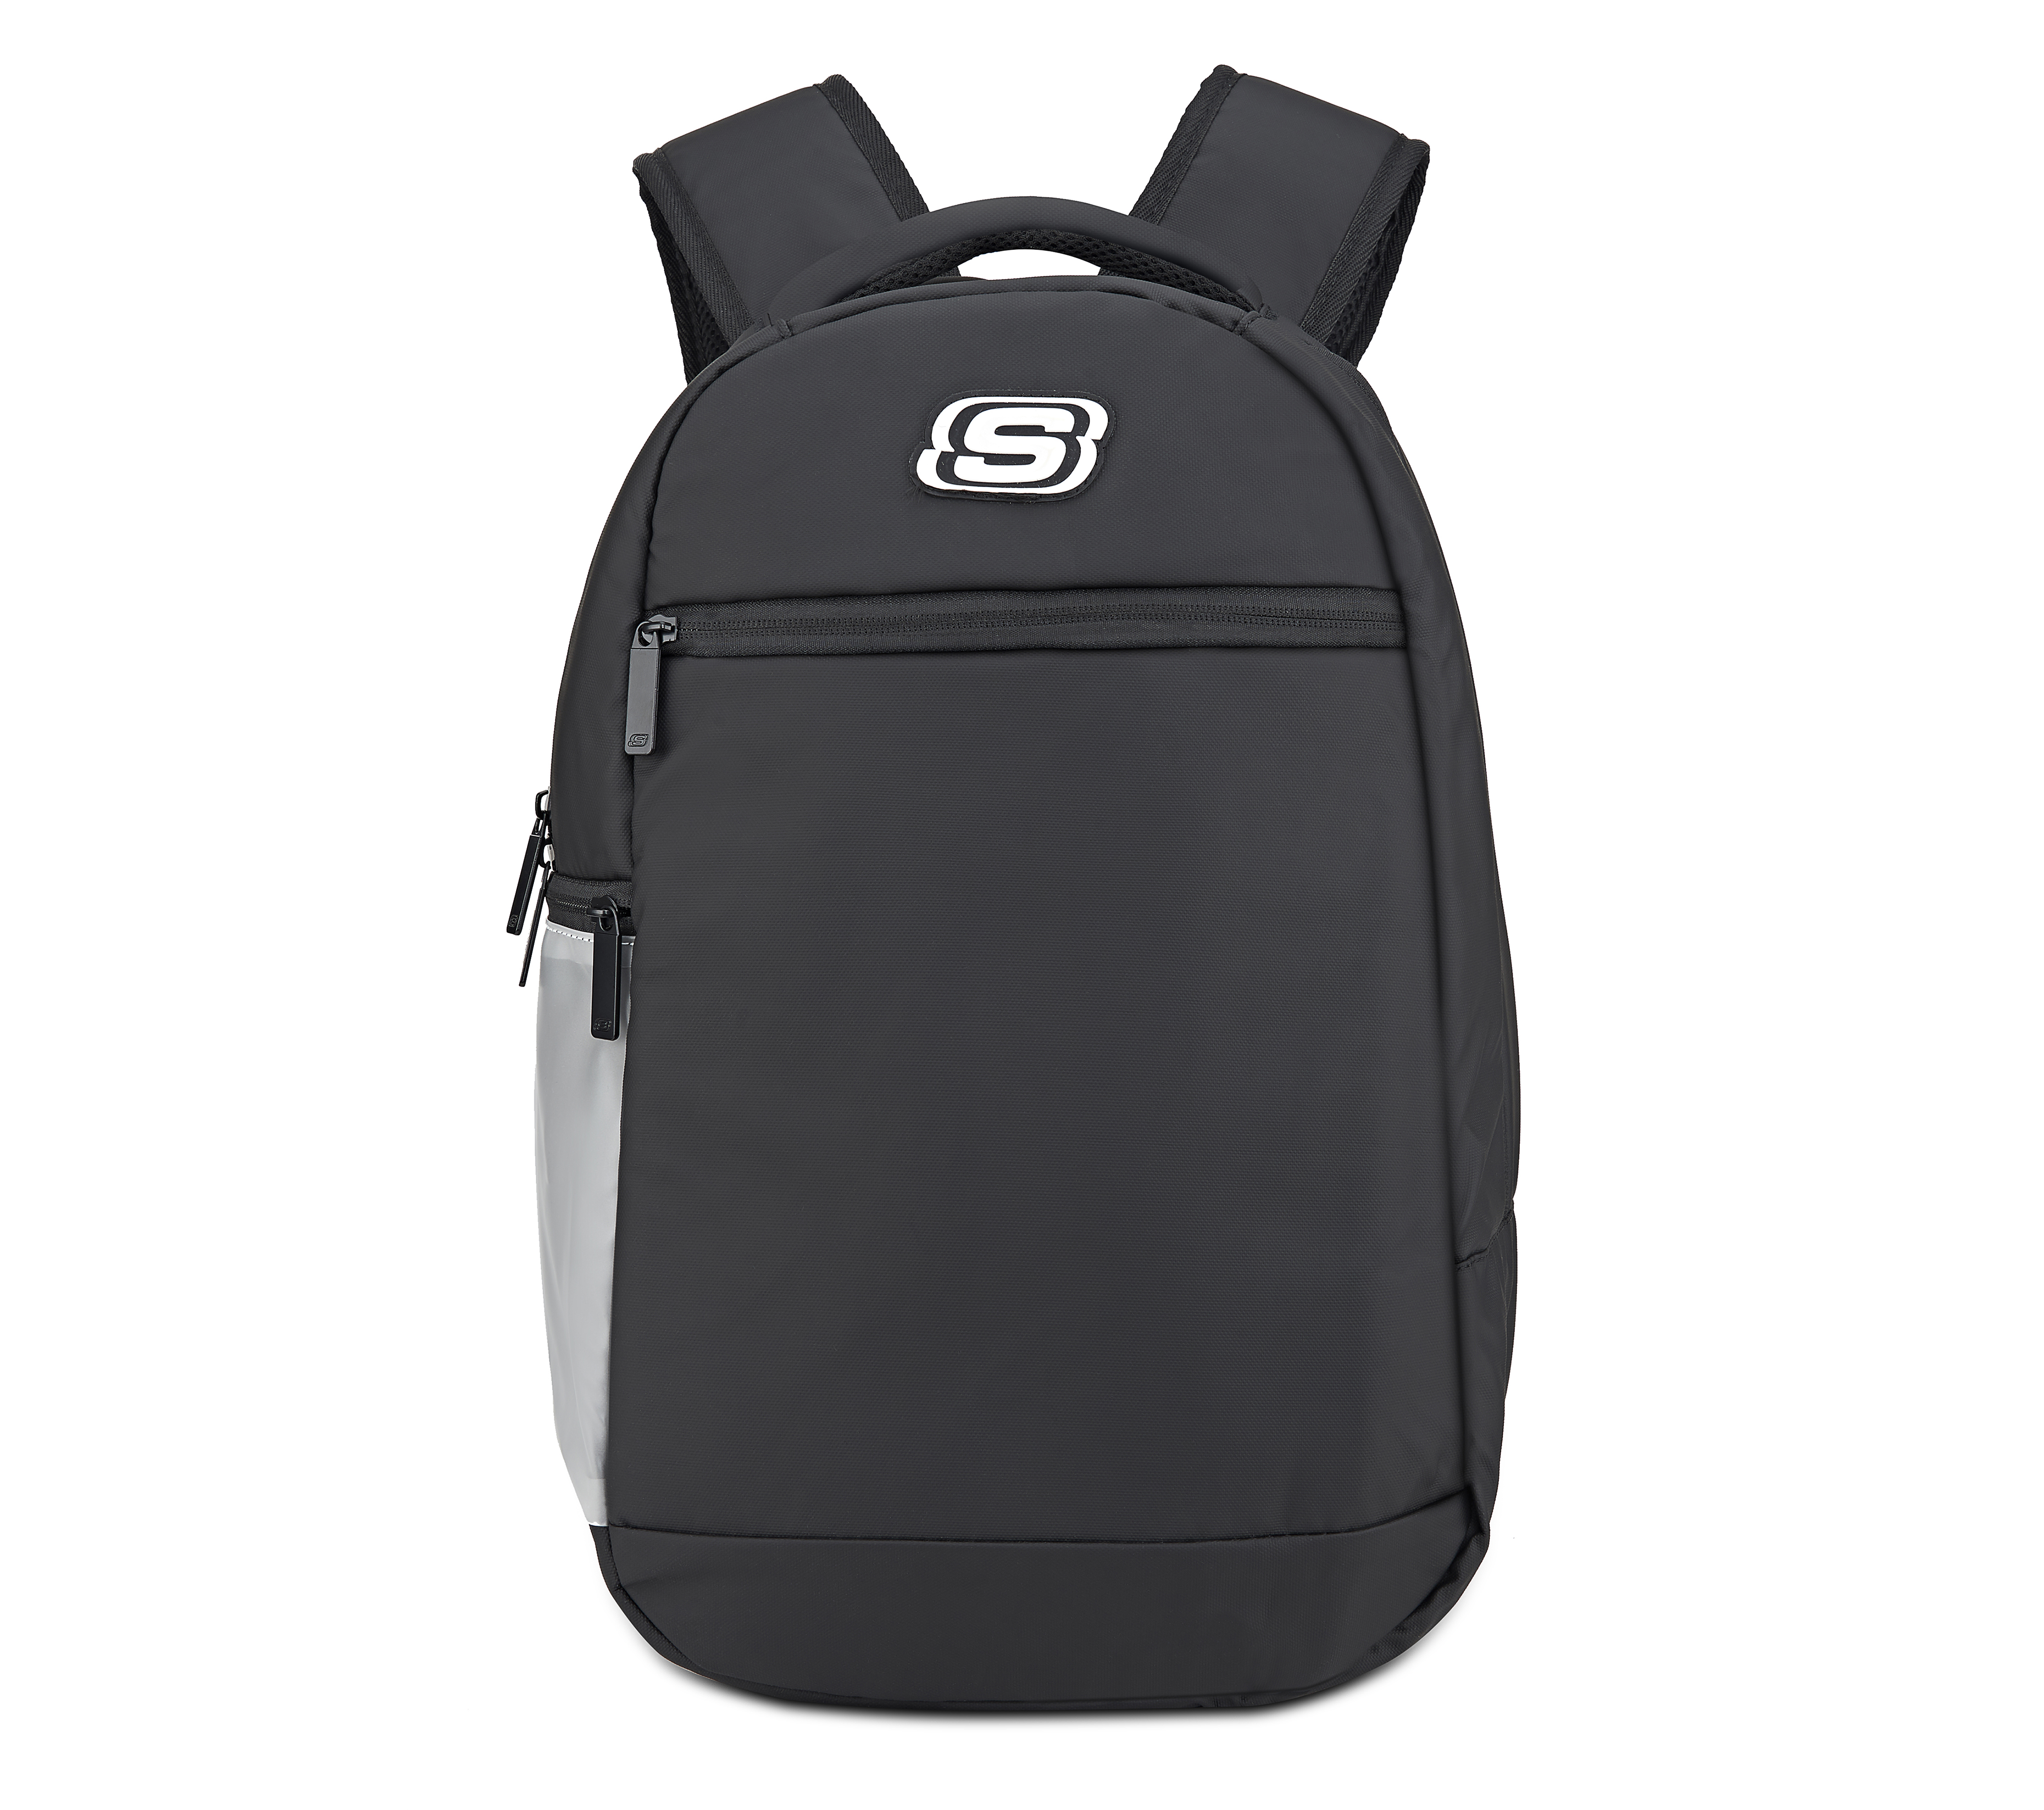 BACKPACK, BBBBLACK Accessories Lateral View